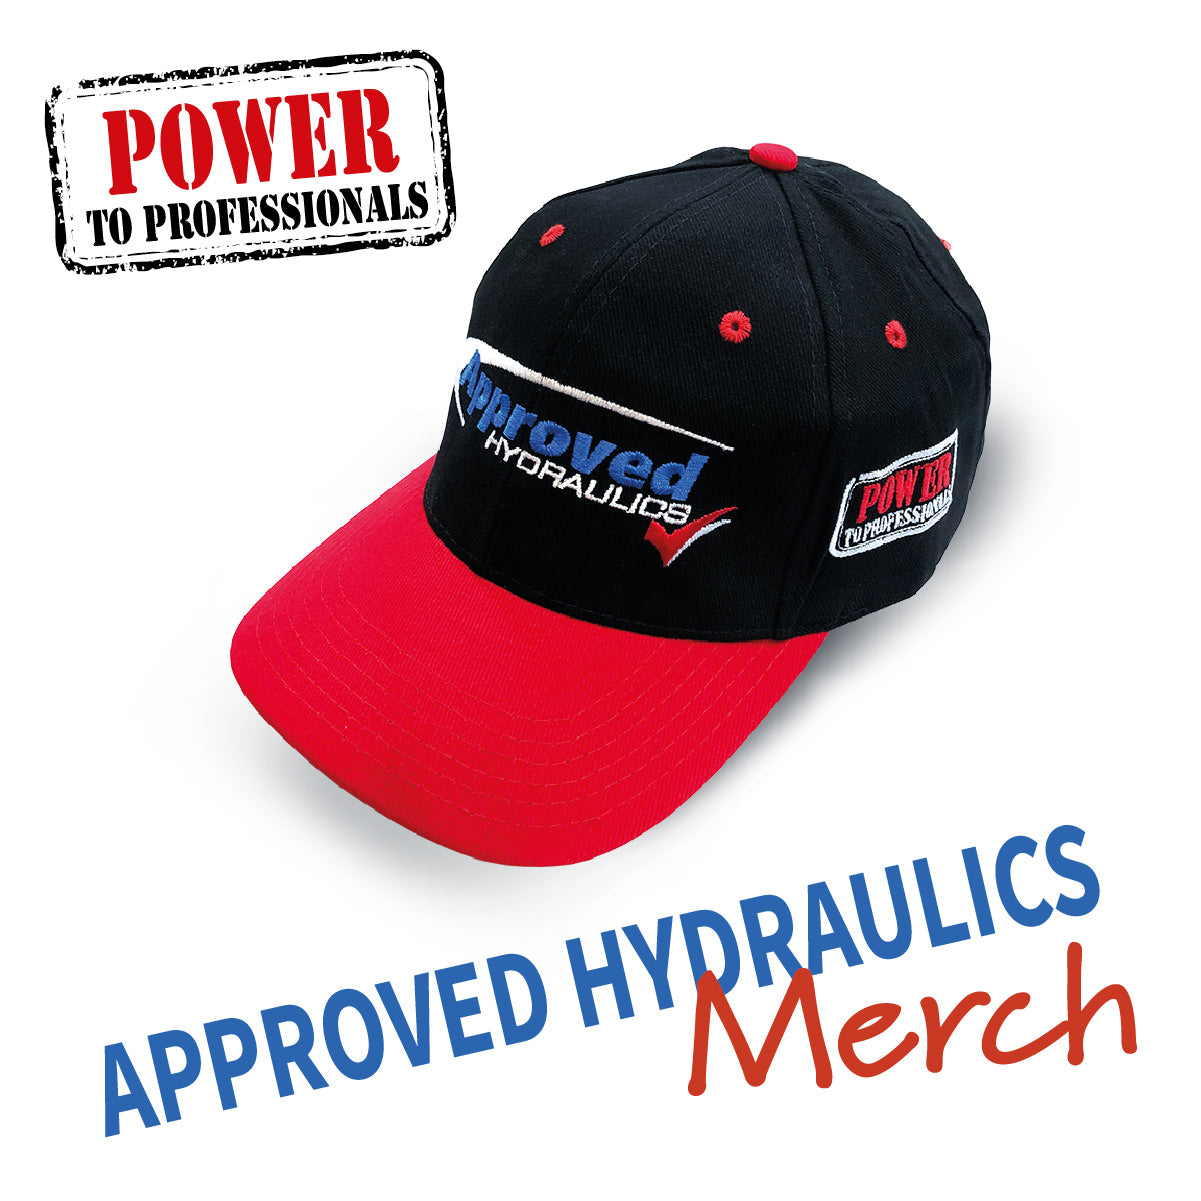 Approved Hydraulics Merchandise